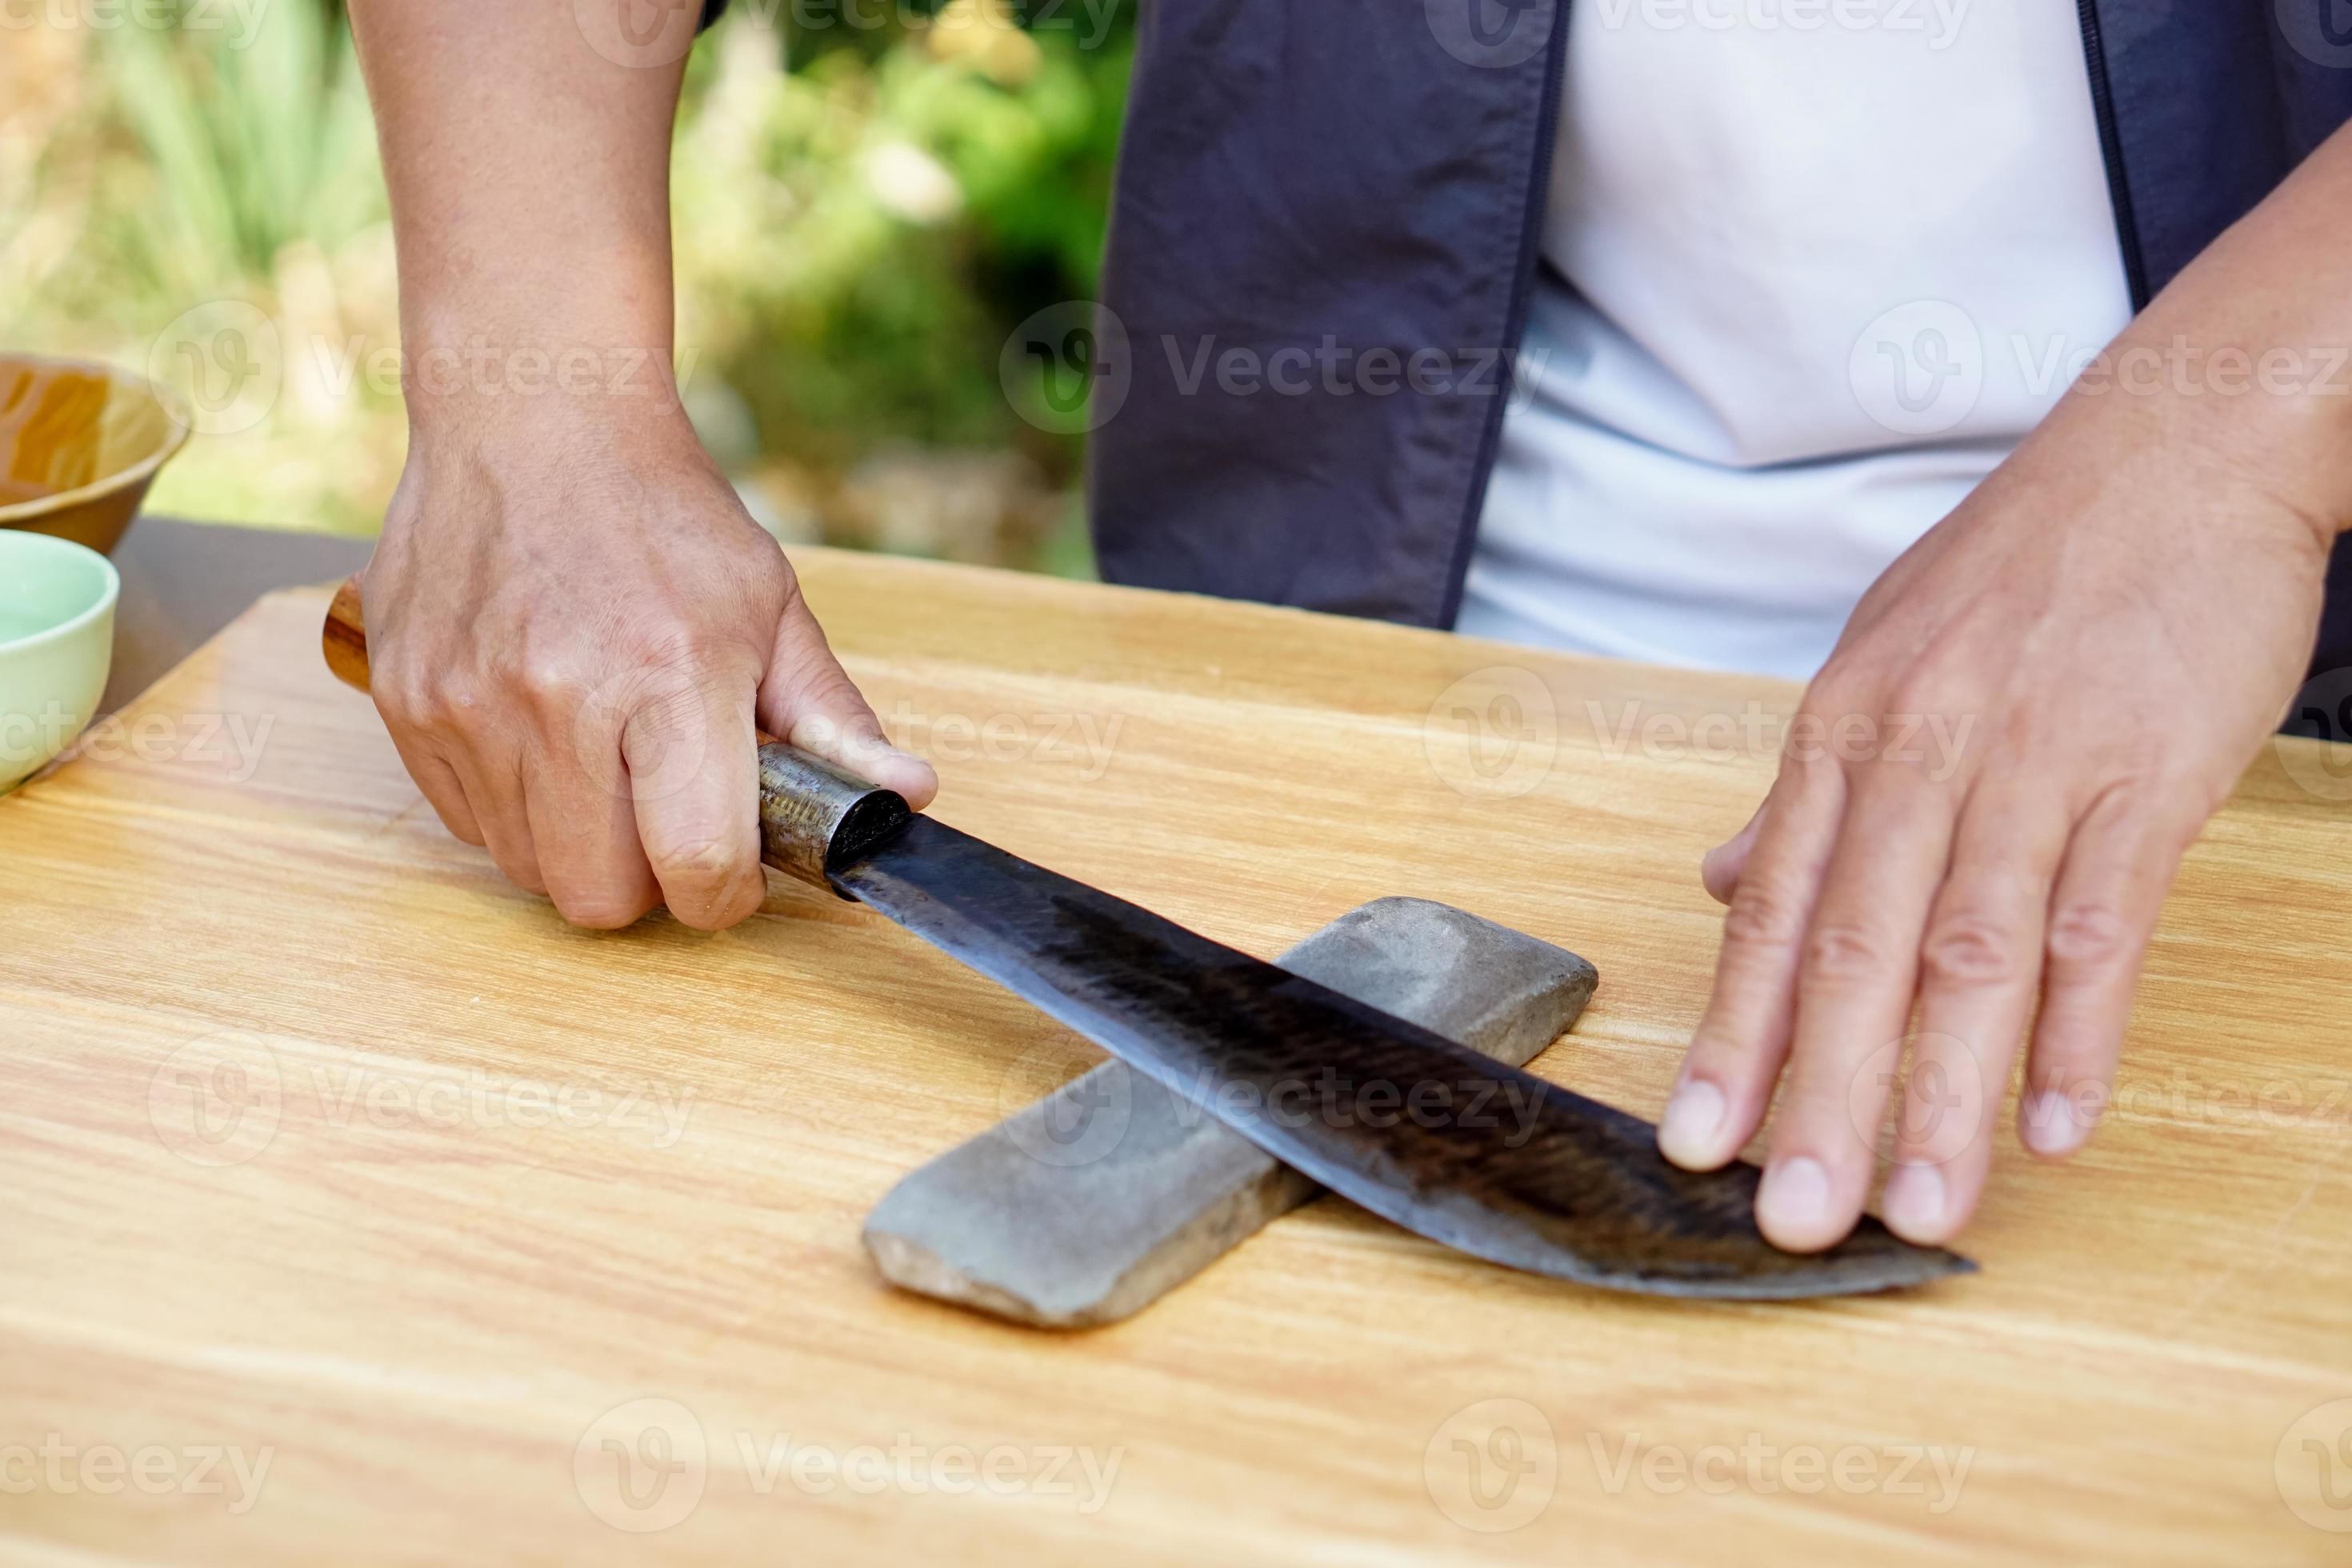 https://static.vecteezy.com/system/resources/previews/017/679/707/large_2x/closeup-man-hands-sharpen-knife-on-whetstone-sharpener-or-grindstone-concept-maintenance-tools-for-cooking-make-knife-sharp-not-dull-for-long-live-using-original-style-photo.JPG